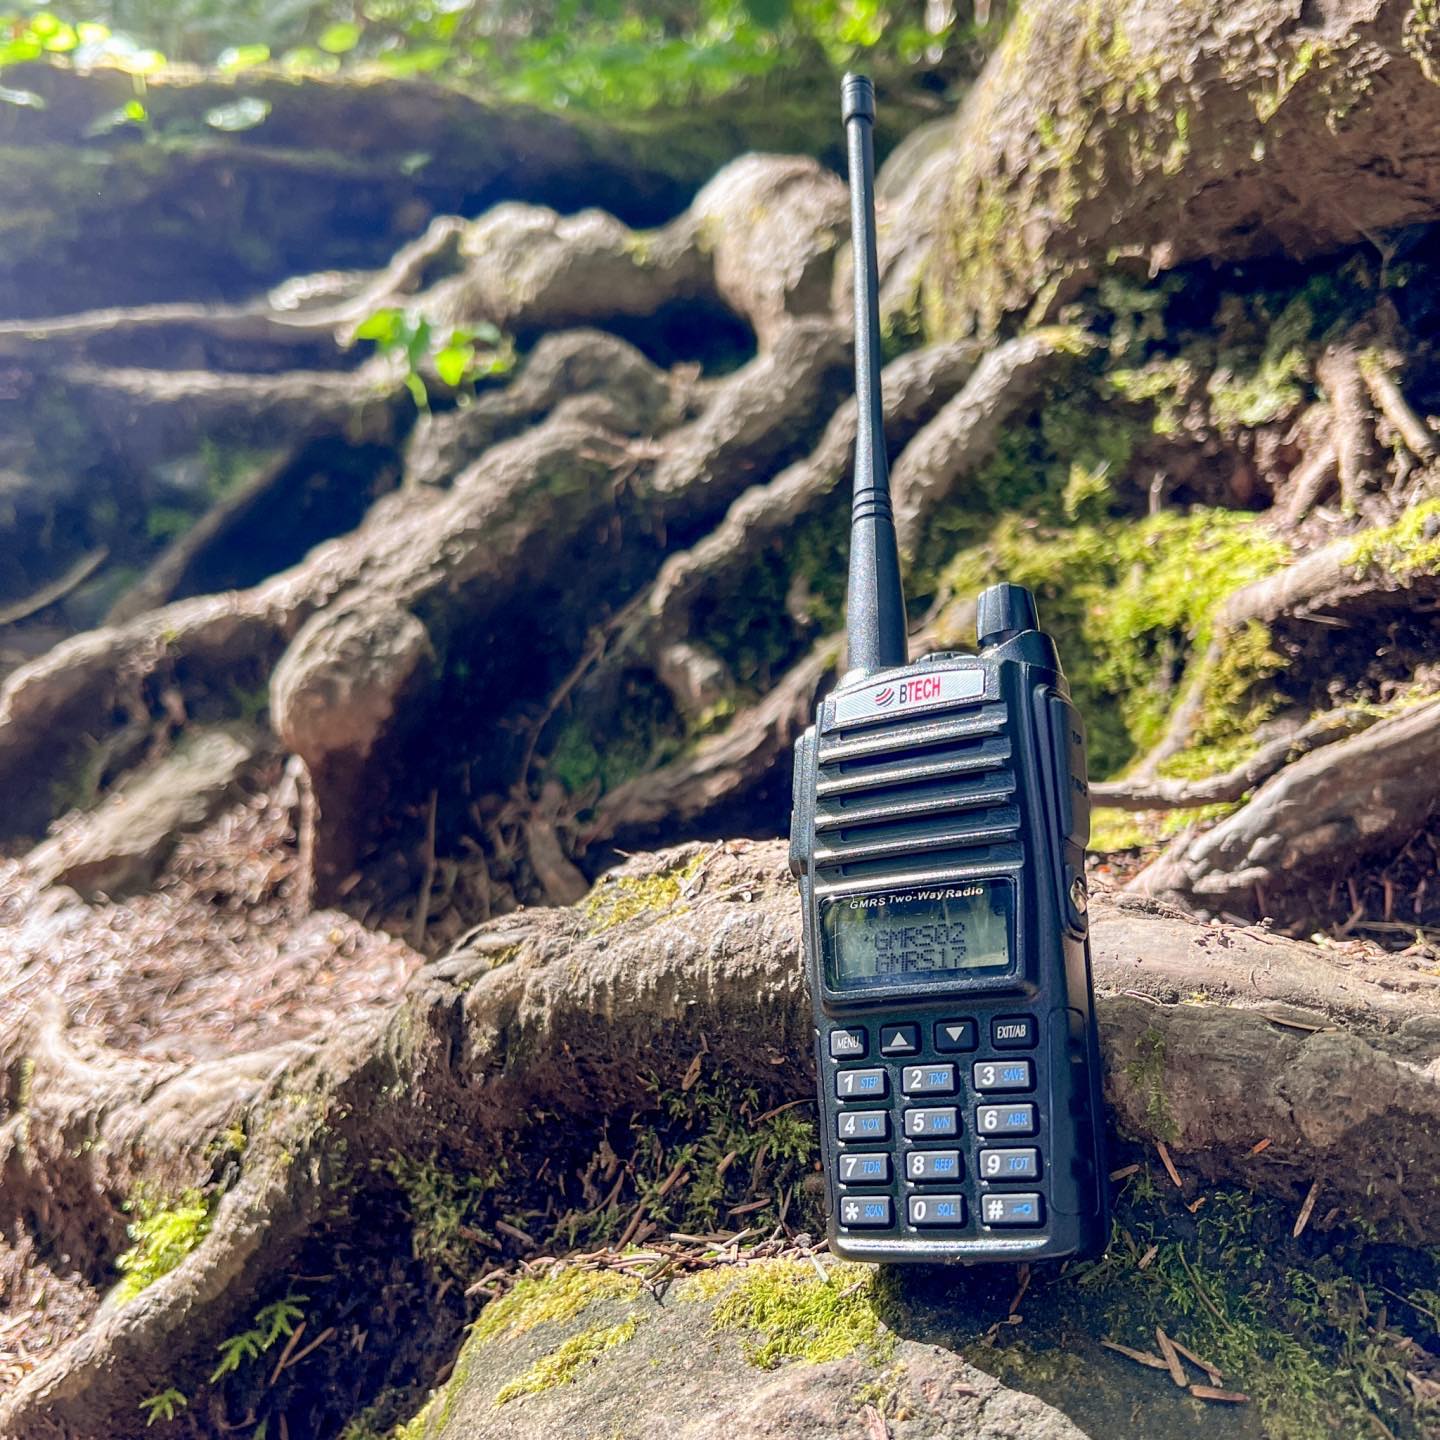 We just released a new version of our popular GMRS radio. This one has all the bells and whistles. But don't take our word for it - check out this ⭐️ 5 STAR ⭐️ review of our all new GMRS-V2 by Miklor (Link in Bio)

#GMRS #review #product #adventure #hiking #survival #travel #radio #amateurradio #professionalradio #hamradio #baofeng #btech #fenggang